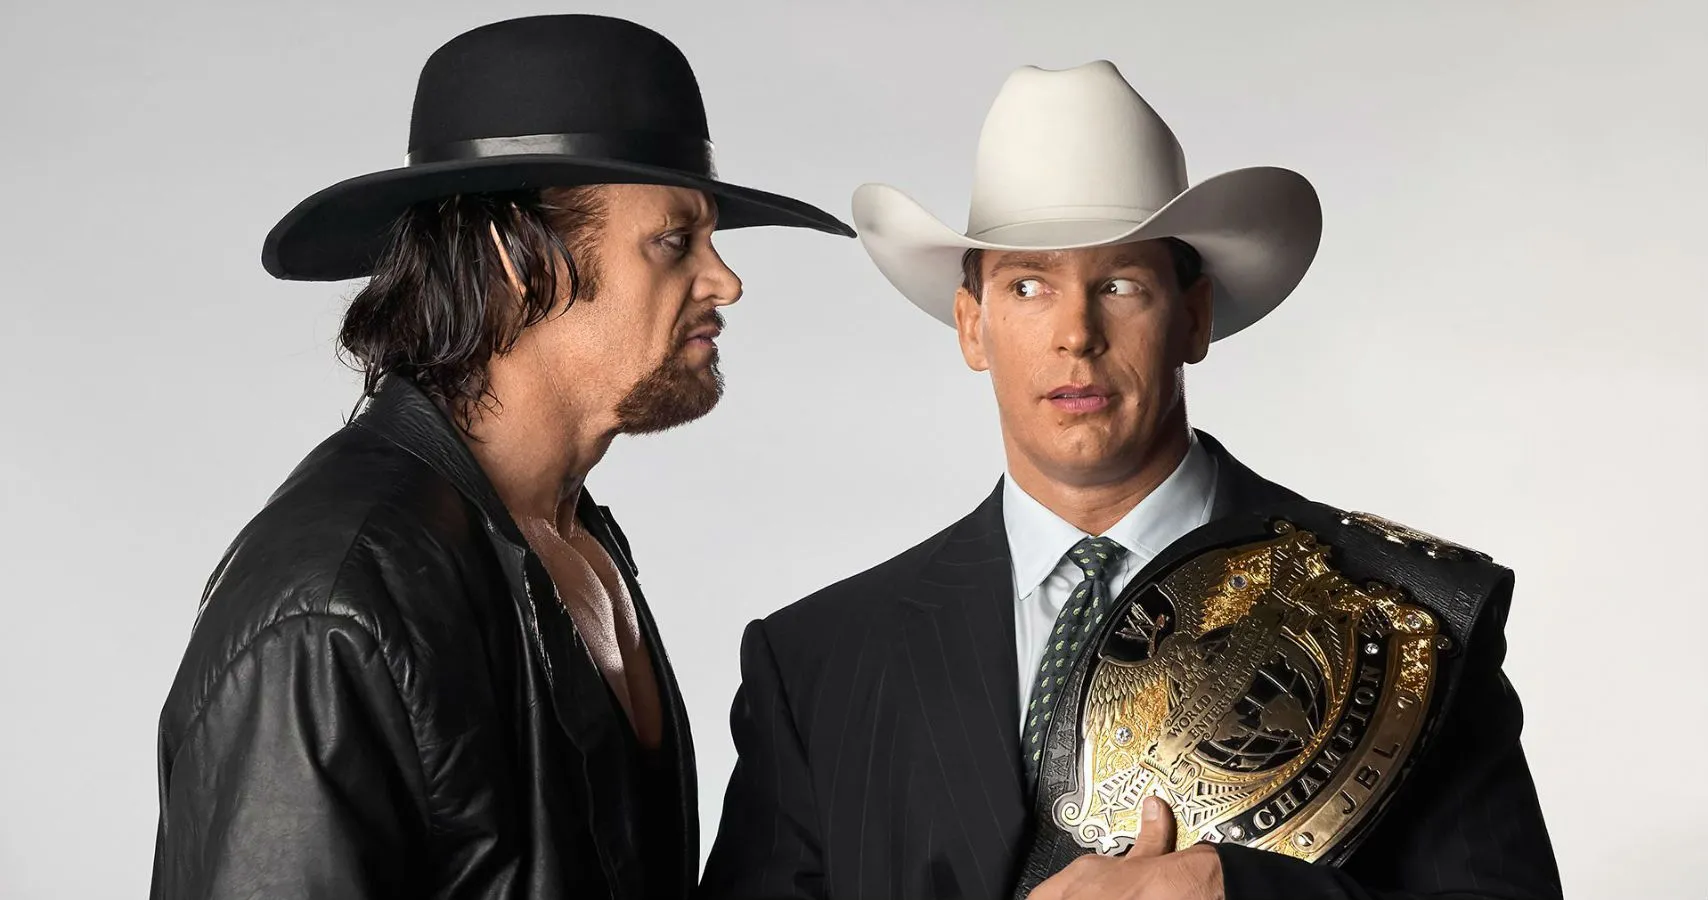 Two legends The Undertaker and JBL